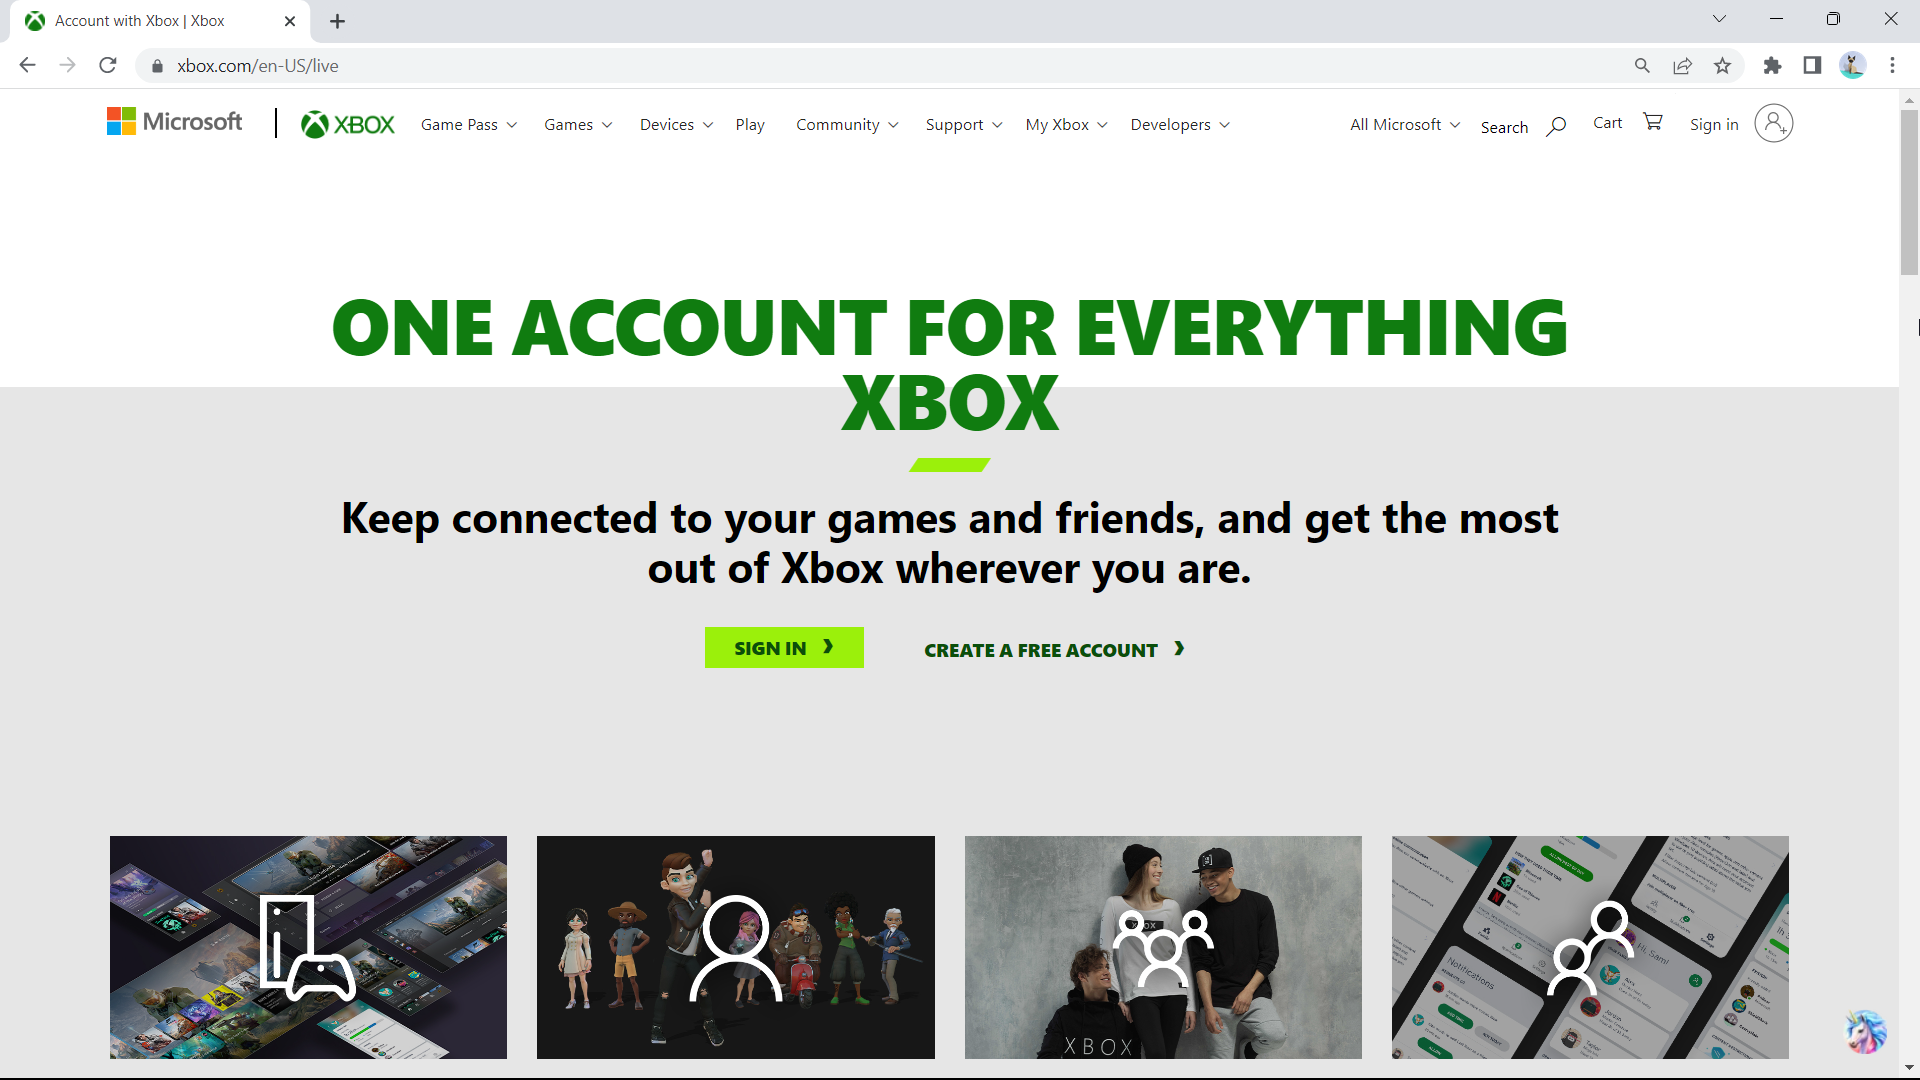 Find your player 2 with Xbox Game Pass's new friend referral program